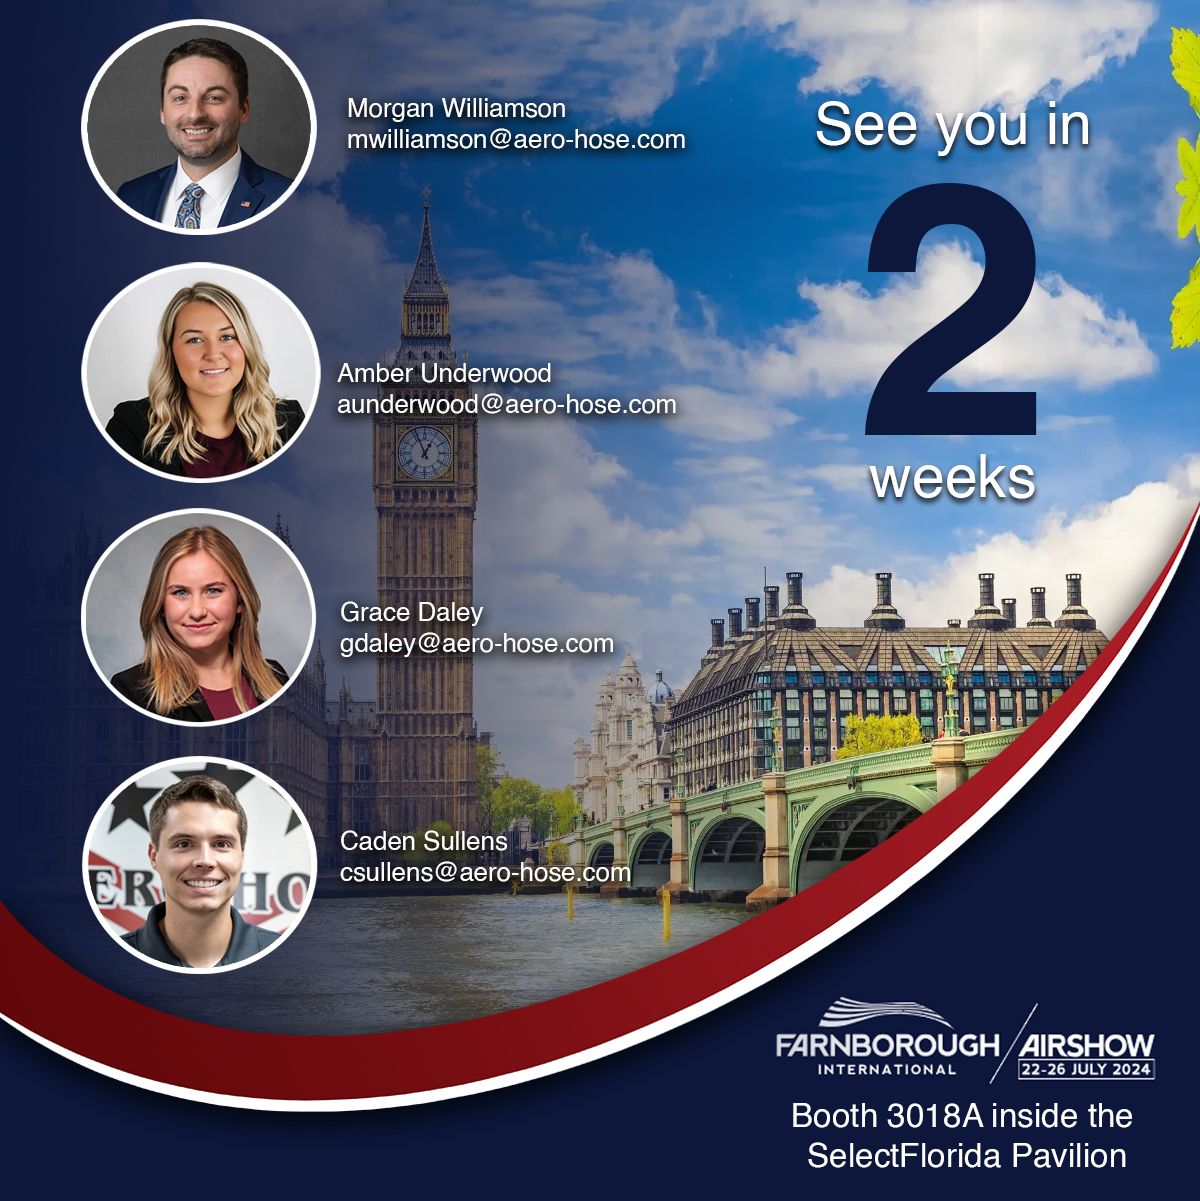 promotional flyer for farnborough international airshow 2024 featuring four people and a sleek auto draft design, stating "see you in 2 weeks." contact details and booth location information (3018a, selectflorida pavilion) are provided.